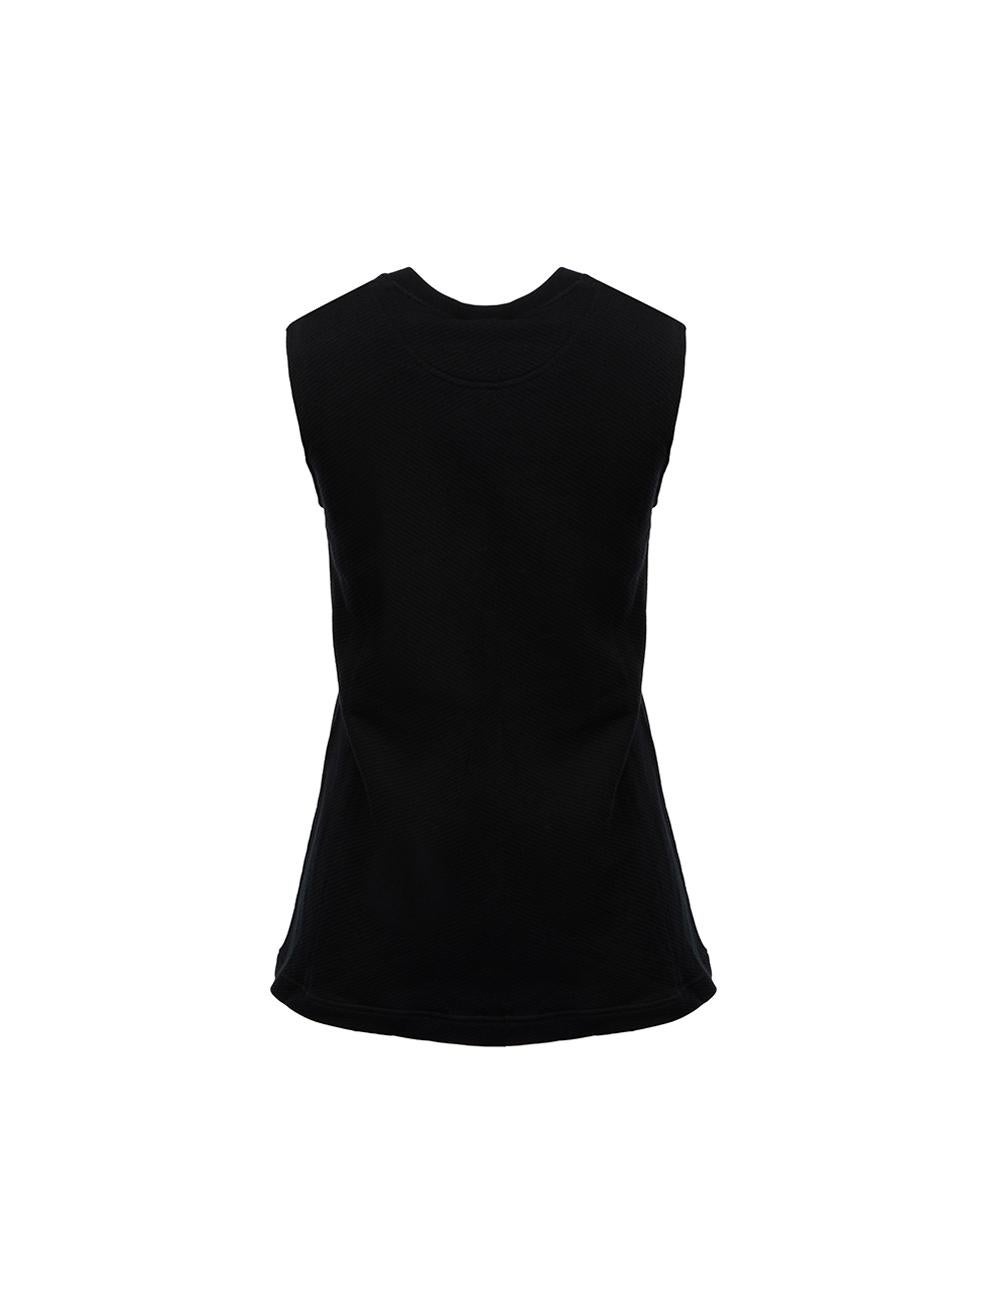 Black Logo Embroidered Waves Printed Sleeveless Top Size S In New Condition For Sale In London, GB